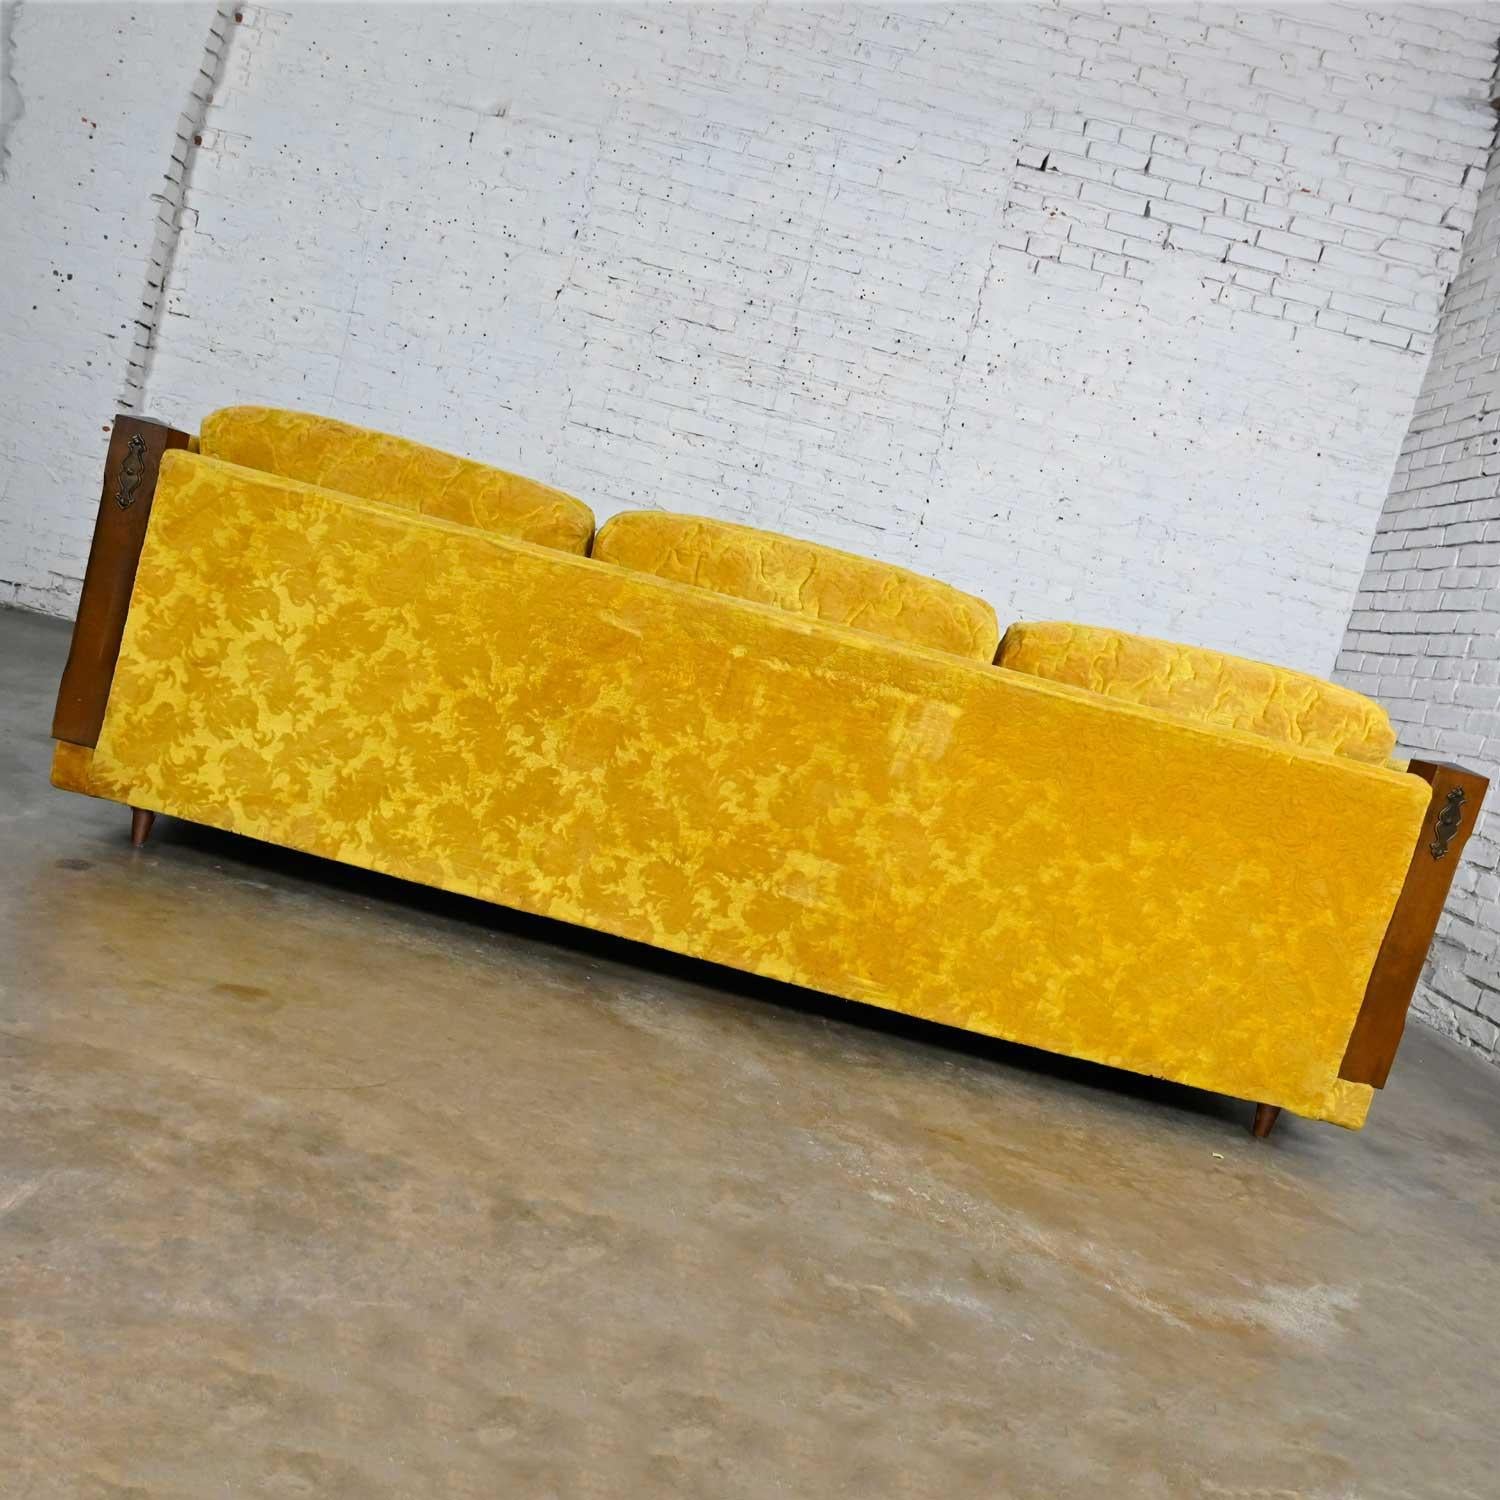 20th Century Vintage Spanish Revival Gold Textured Fabric Sofa Turned with Spindle Sides For Sale